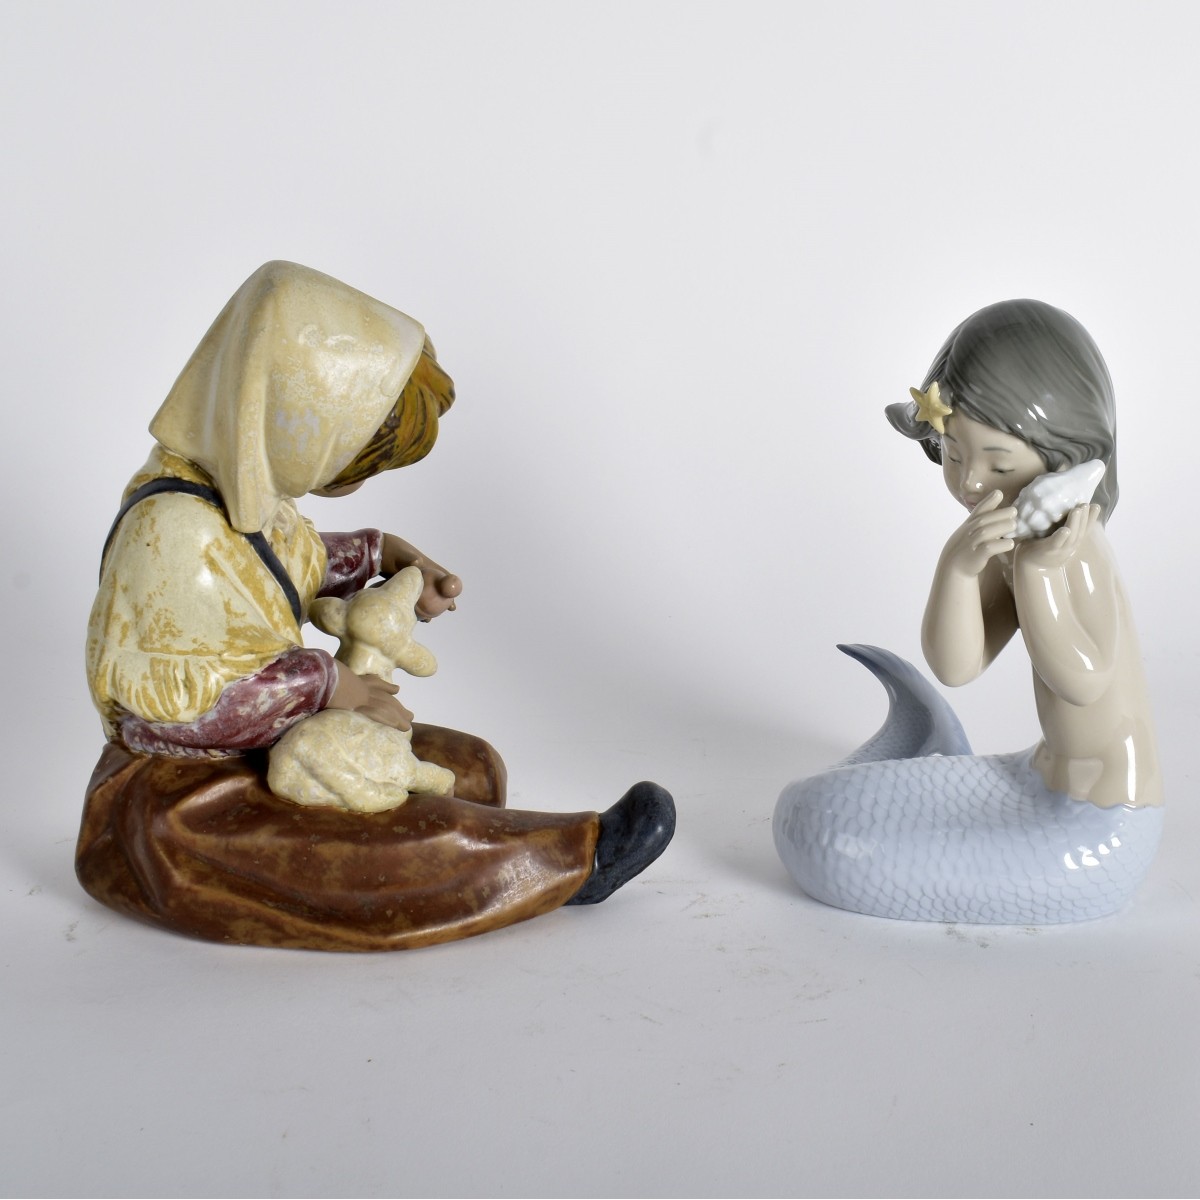 Grouping of Two Figurines